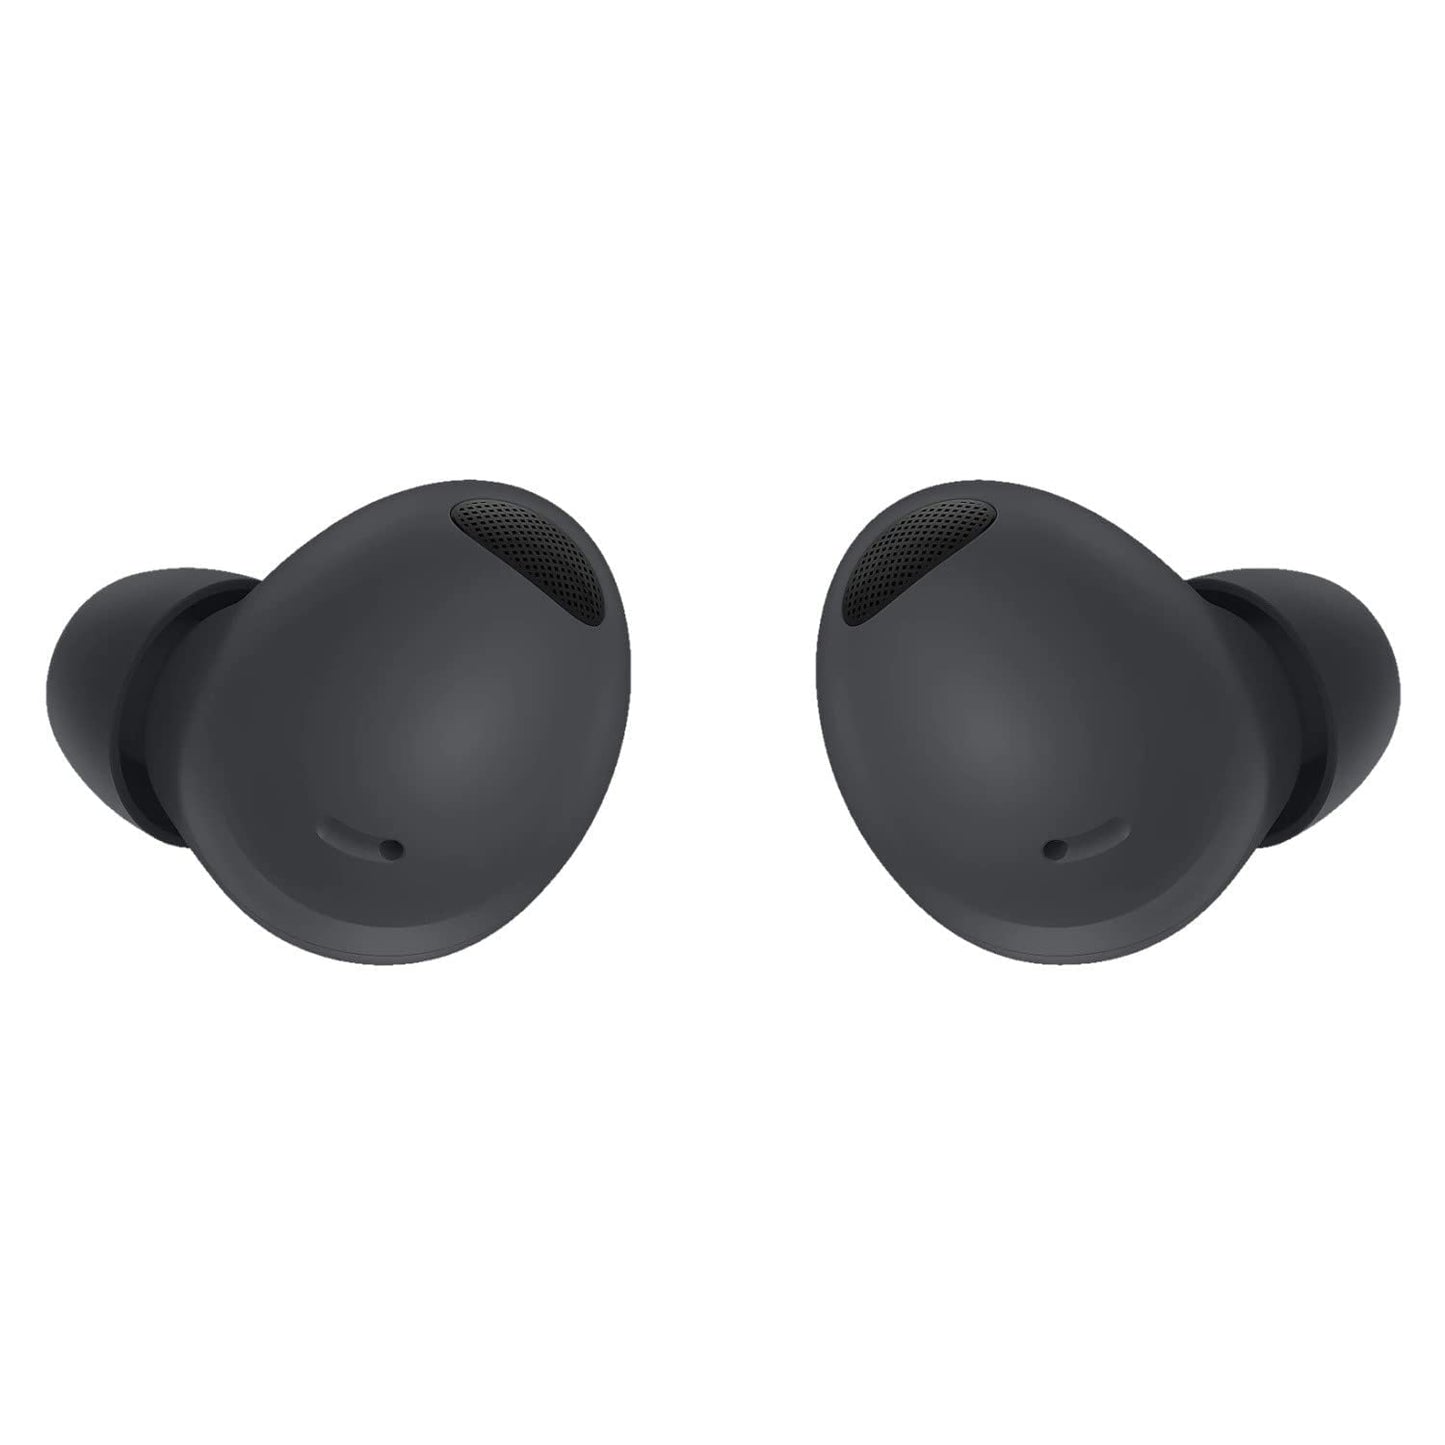 Samsung Galaxy Buds2 Pro Bluetooth Earbuds, True Wireless, Noise Cancelling, Charging Case, Quality Sound, Water Resistant, GRAPHITE (UAE Version)